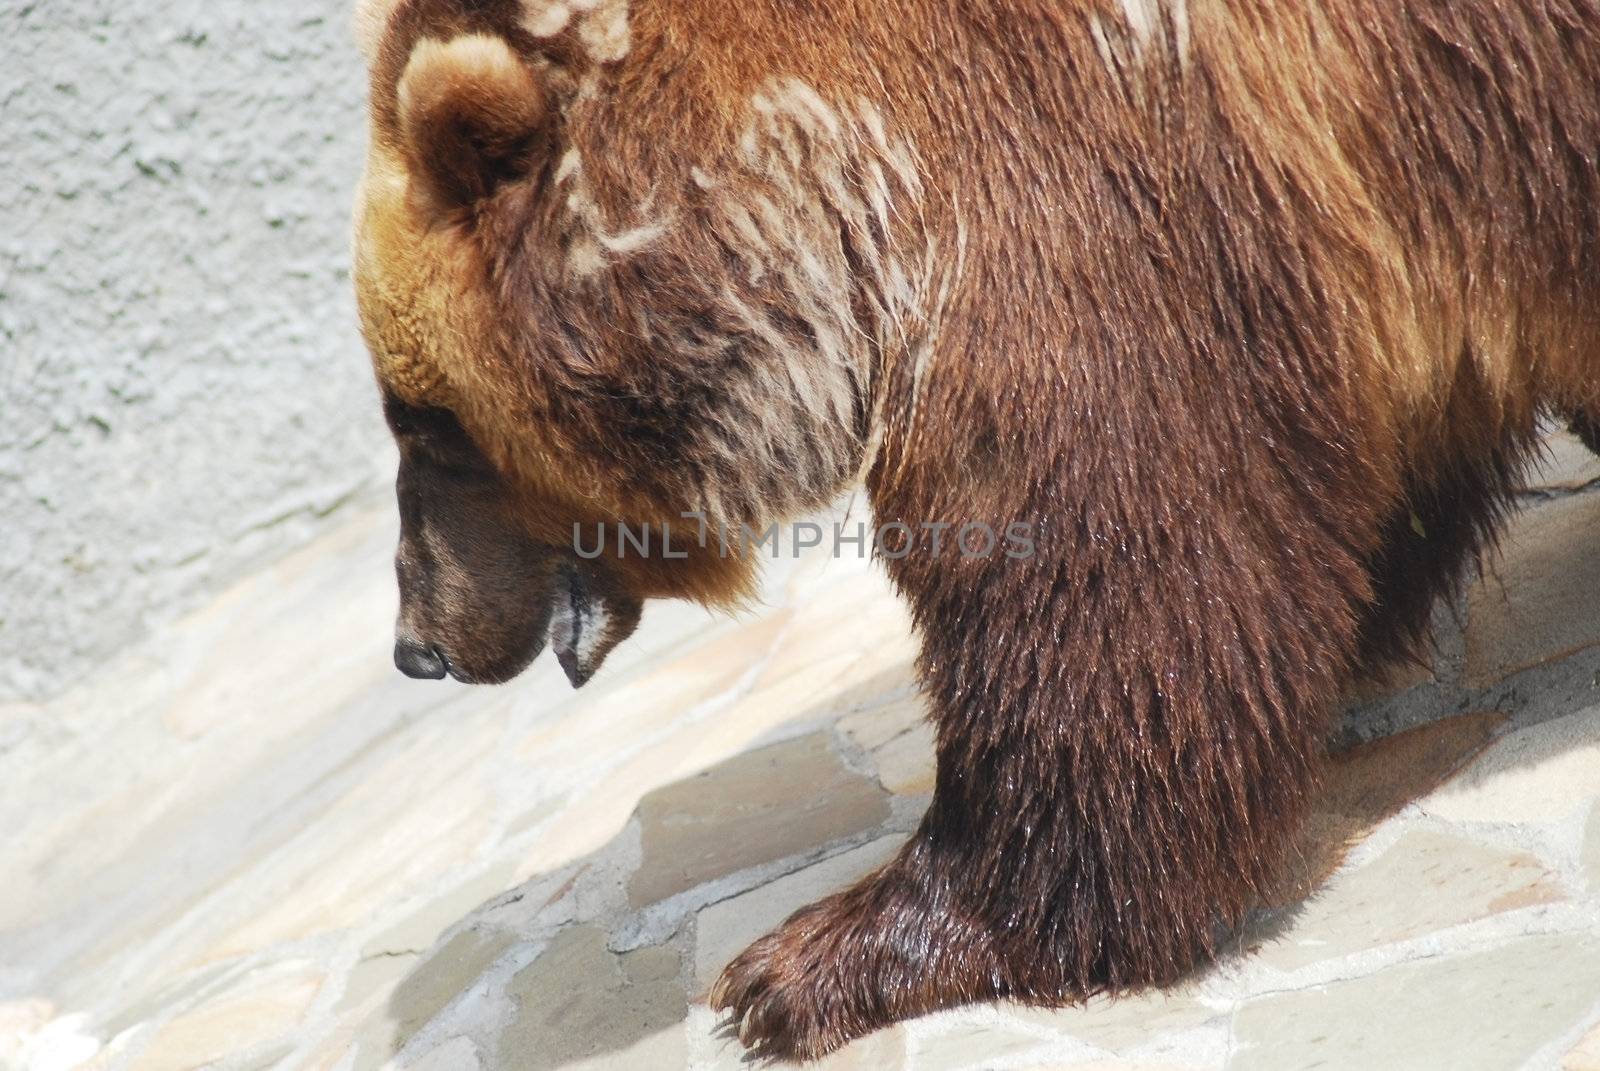 The brown bear close up, wild life  by svtrotof